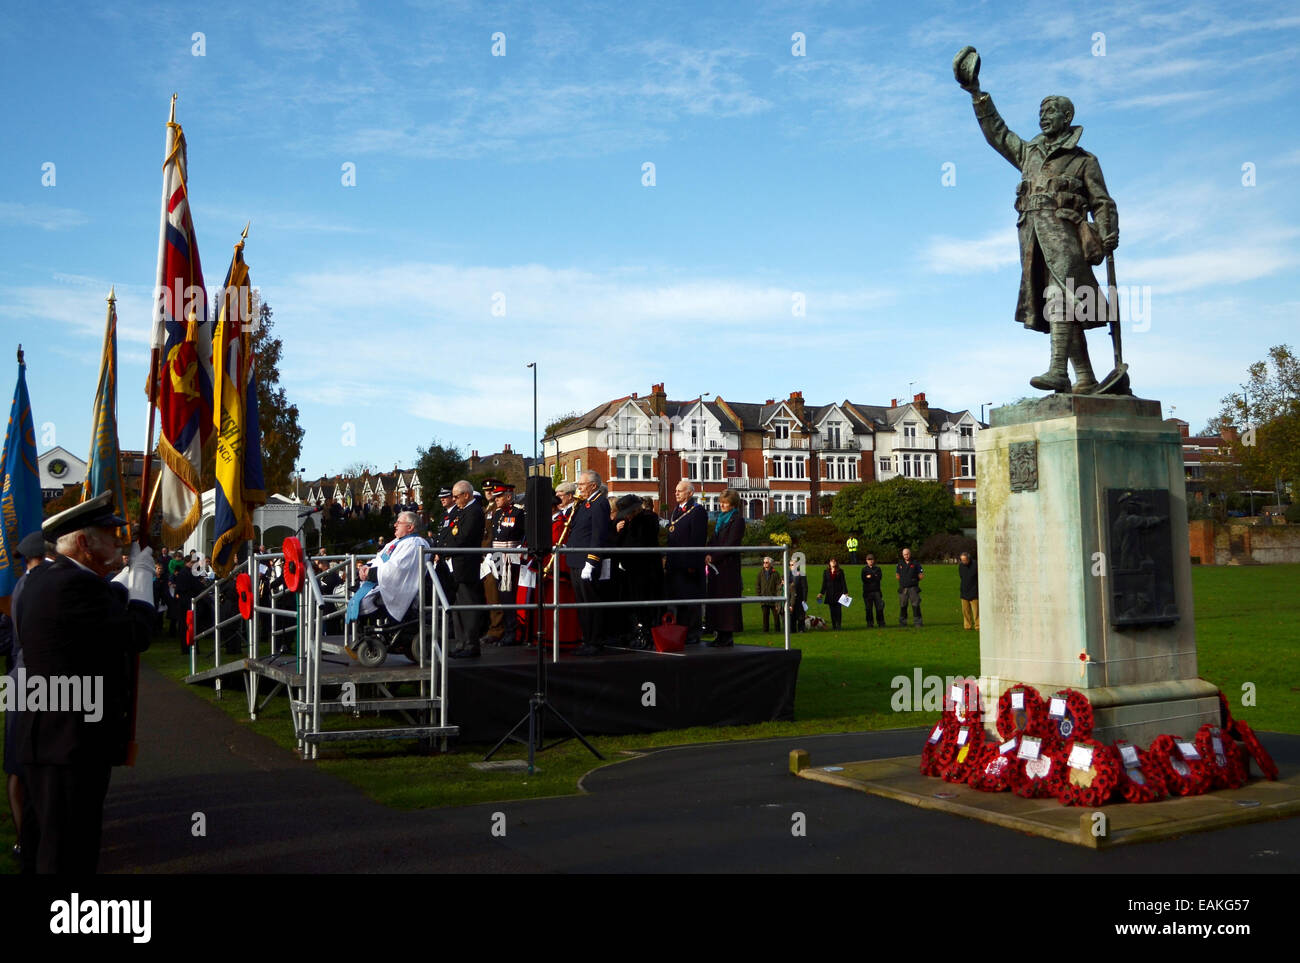 The cenotaph, It is remembrance Sunday 2014, 100 years after the start of the First World War, so many died. Stock Photo